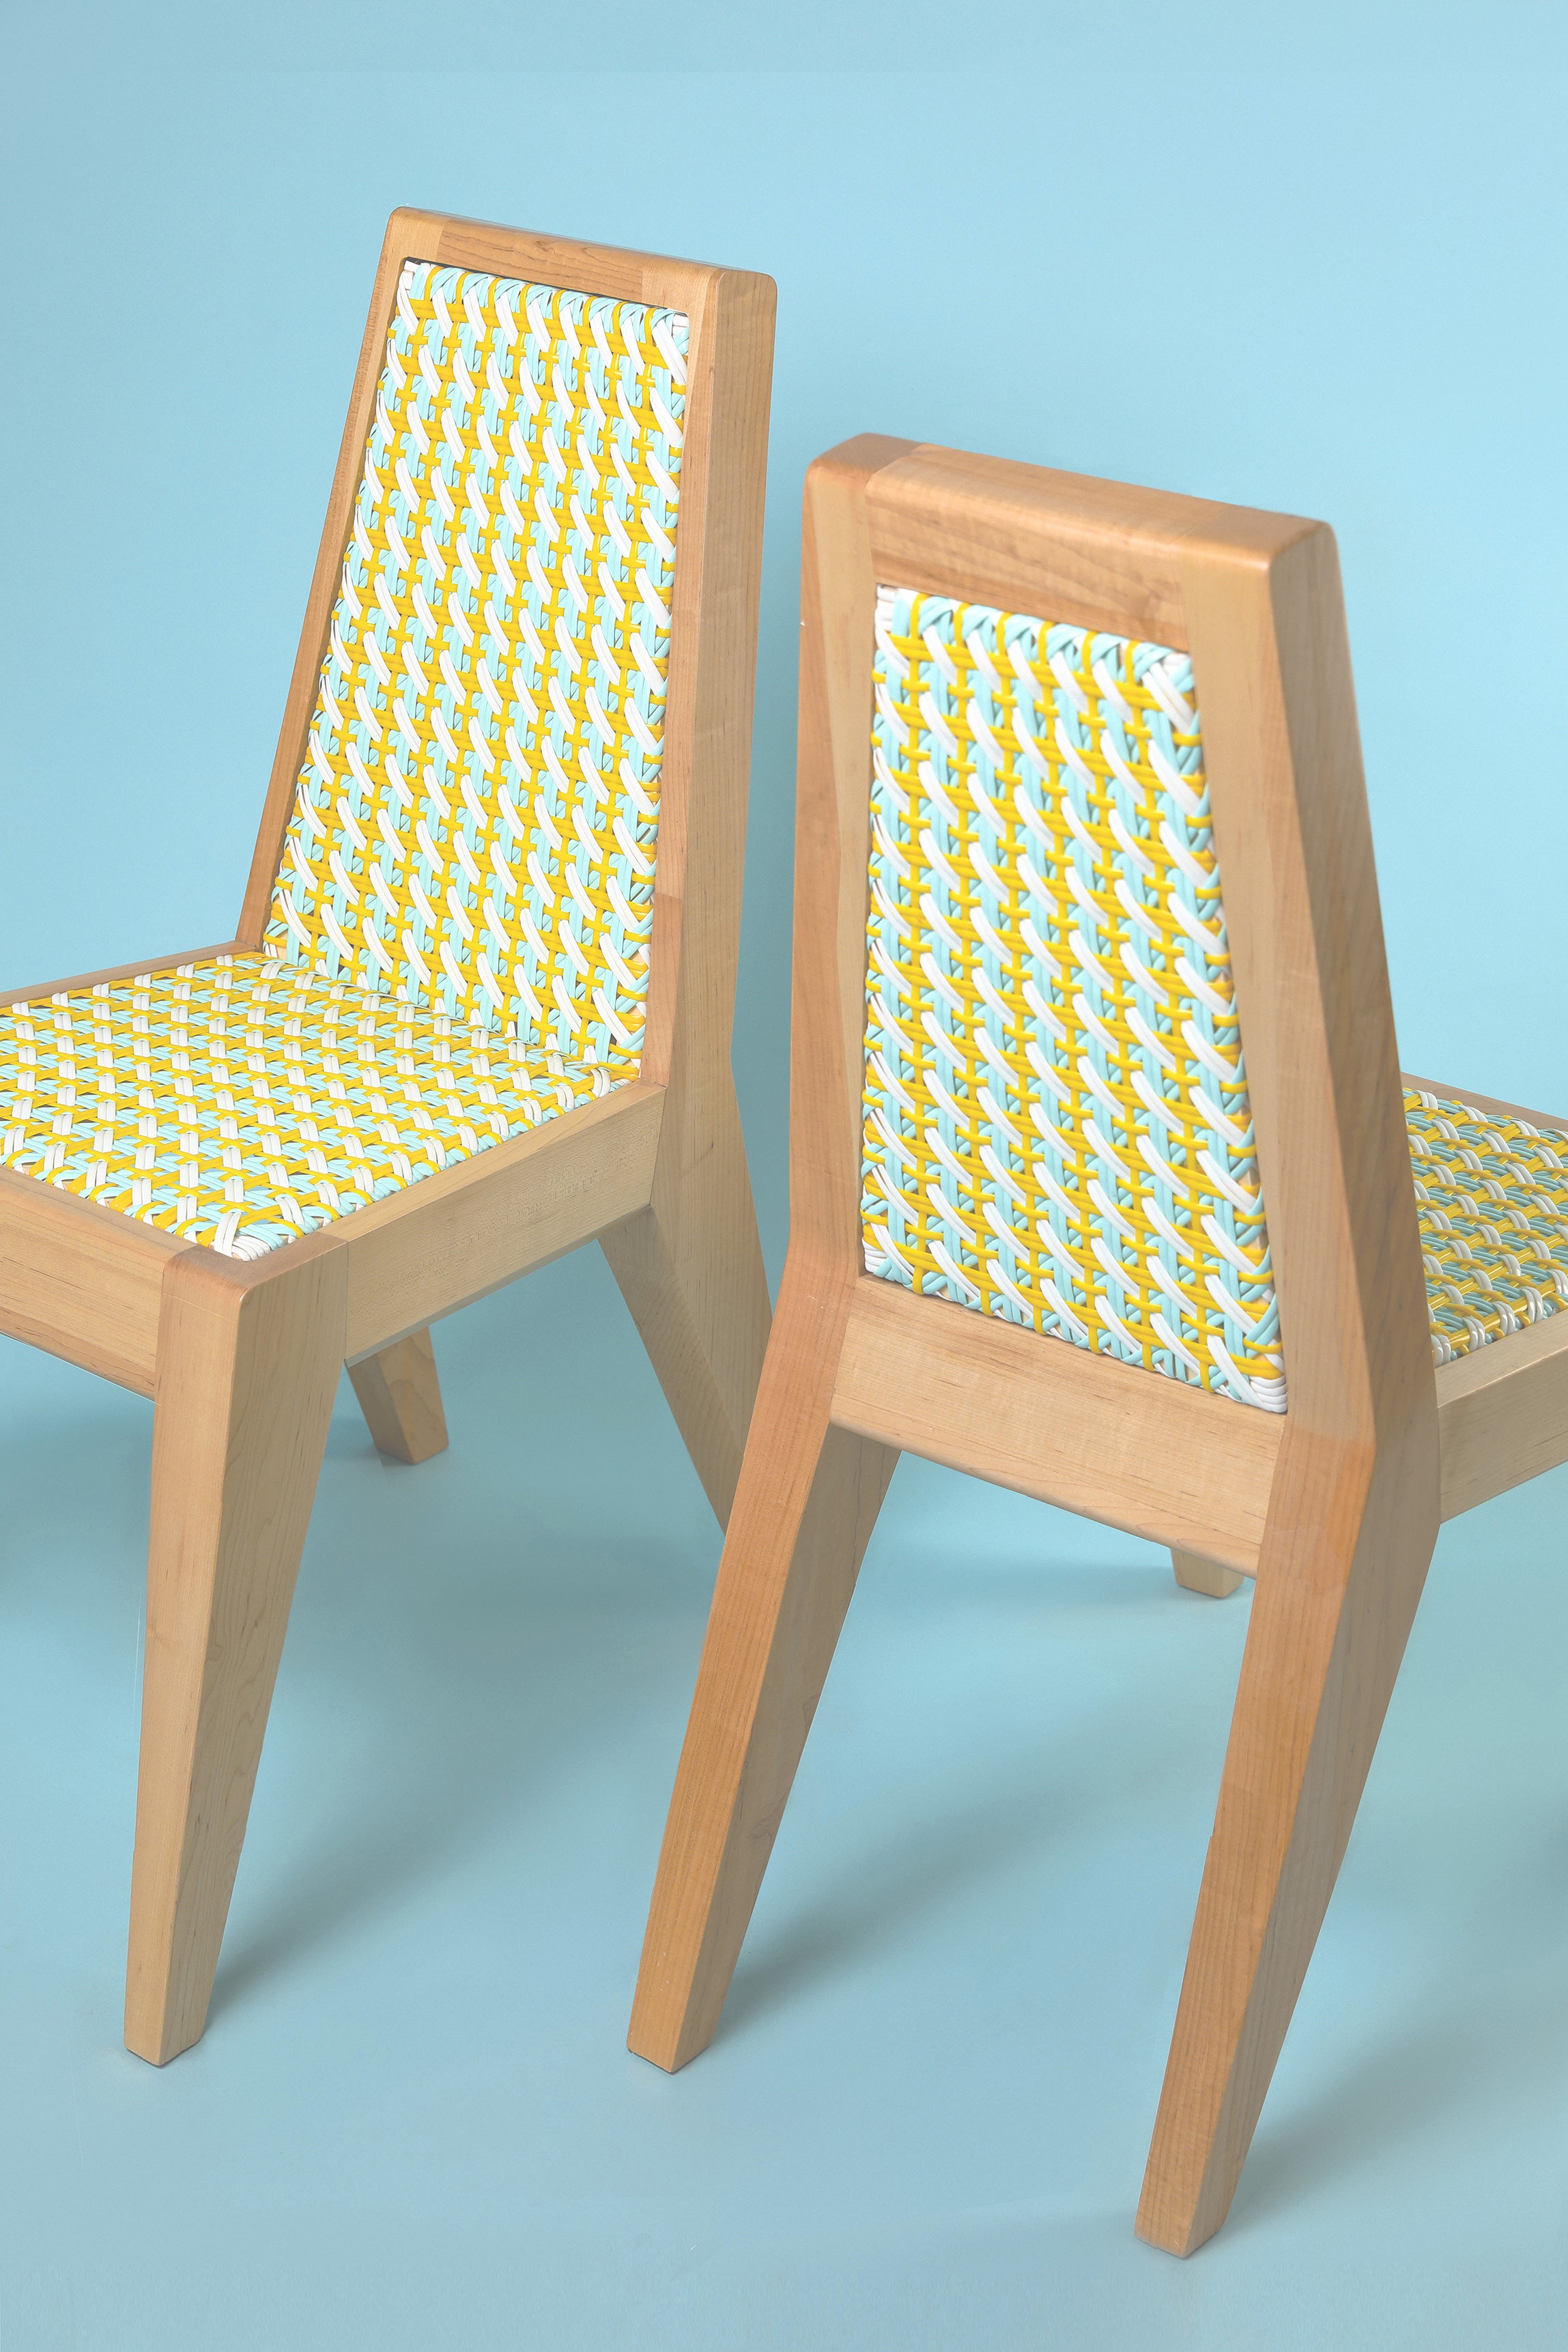 Dina chair form the Beiruti collection of caned timber chairs made in Lebanon designed by Adam Nathaniel Furman